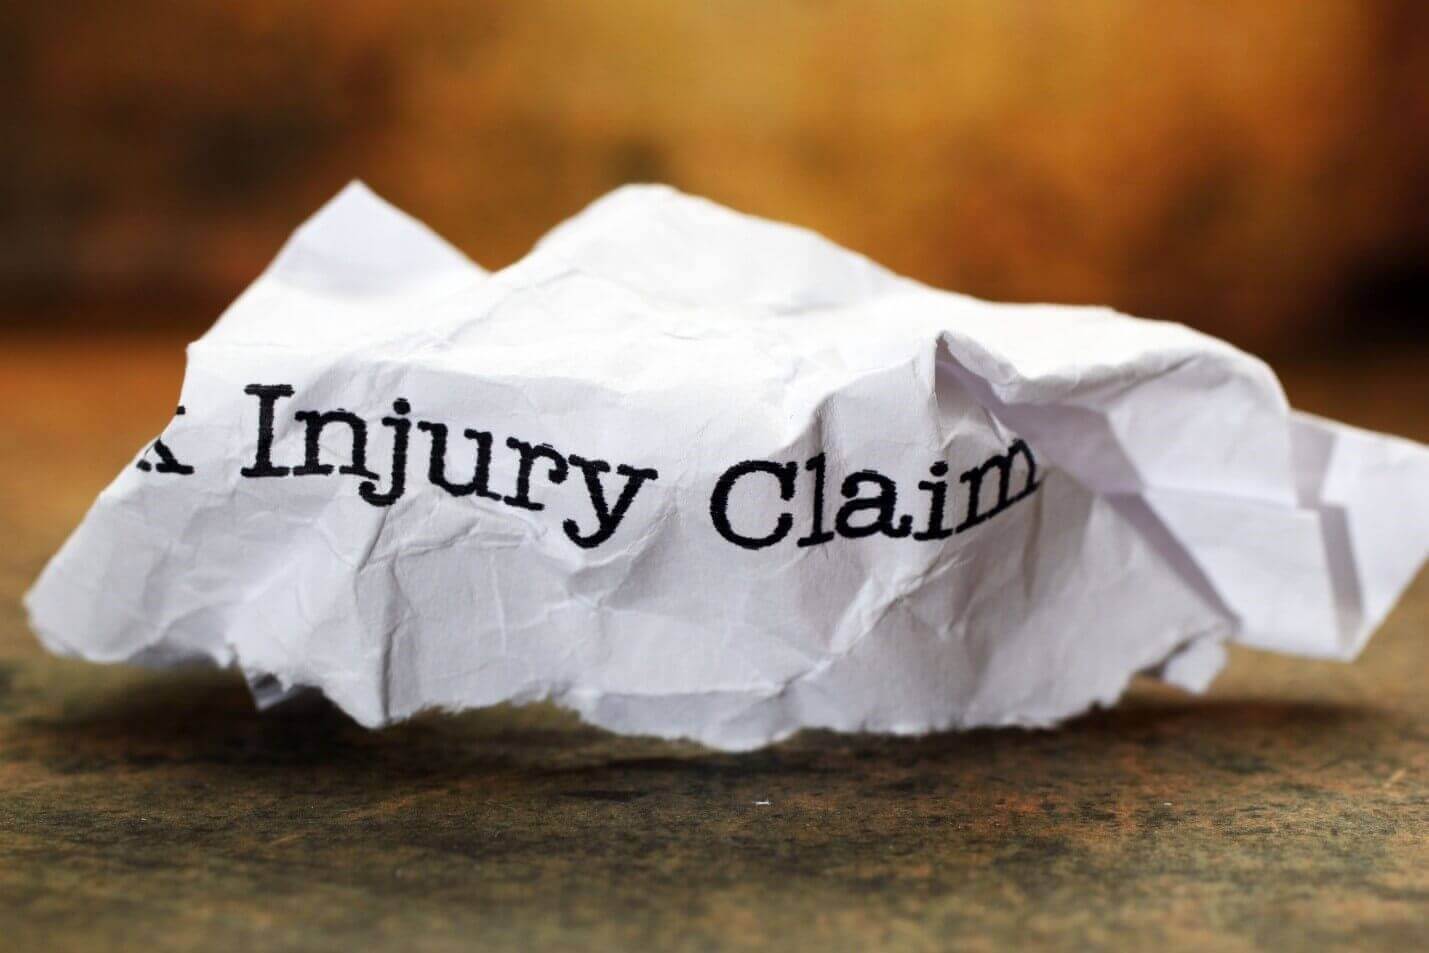 10 Mistakes That Could Ruin Your Personal Injury Case